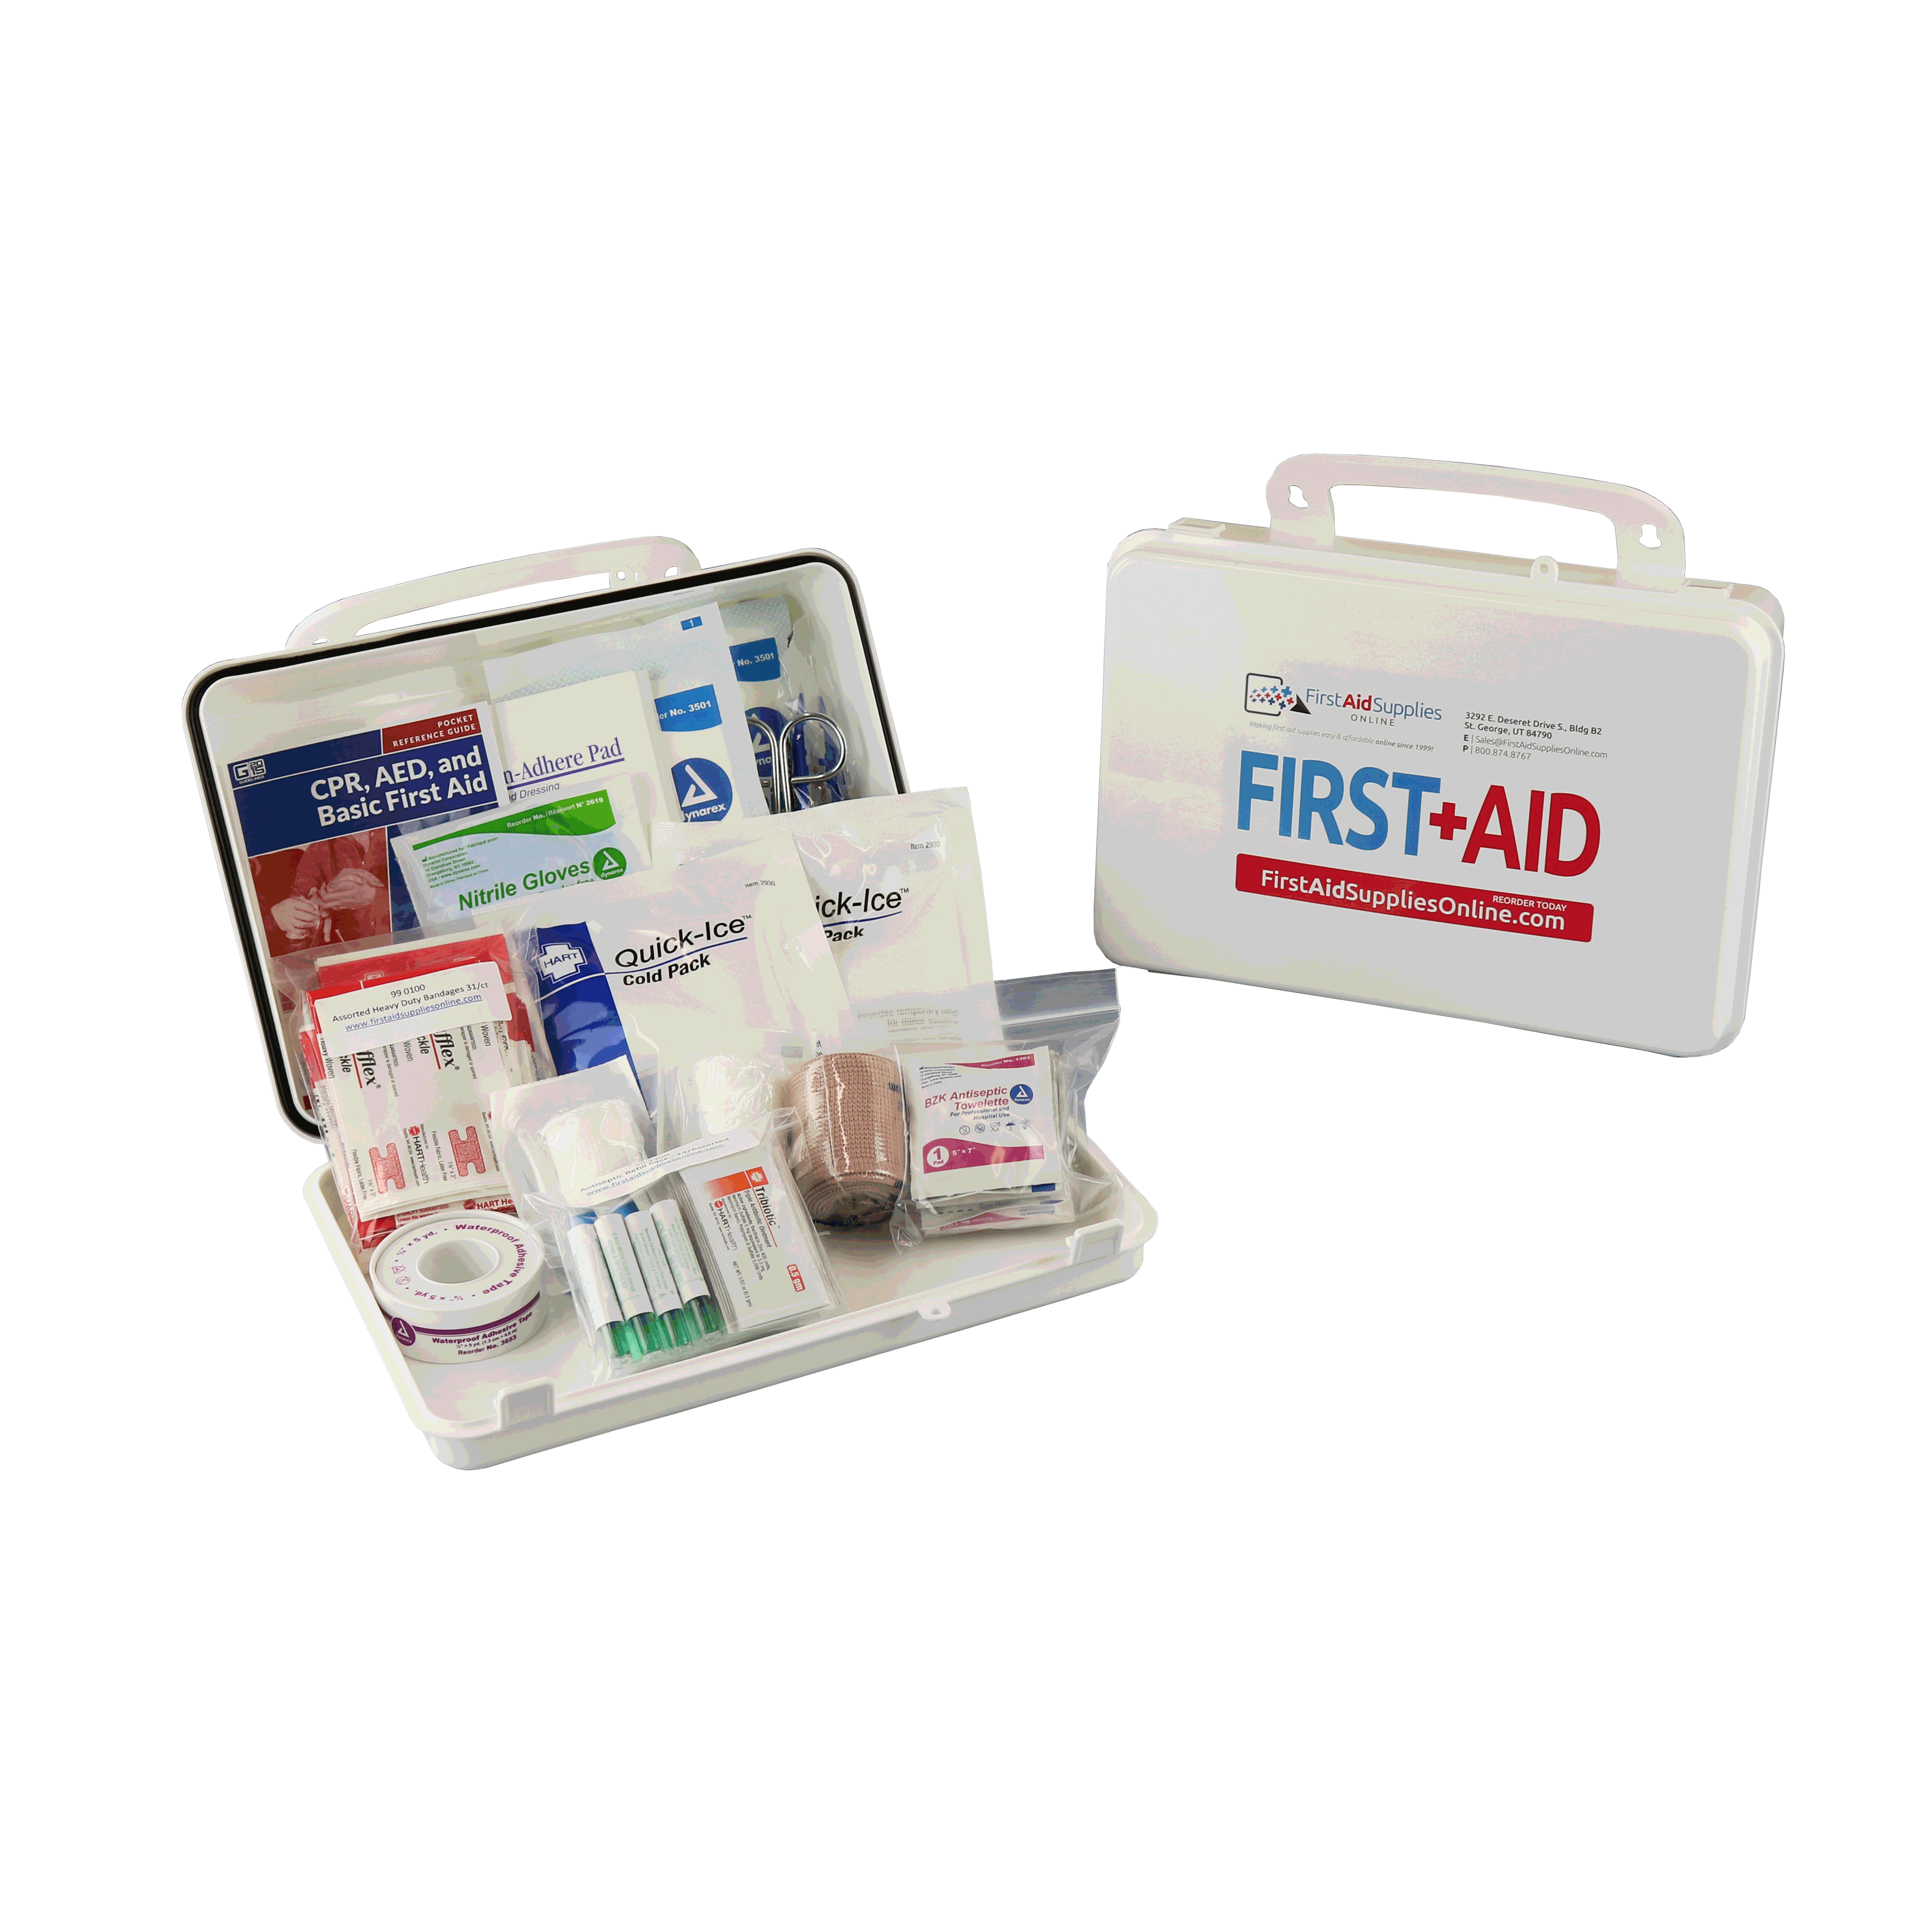 First aid kit A.SSURE – ABS Sports + Protection GmbH & Co. KG